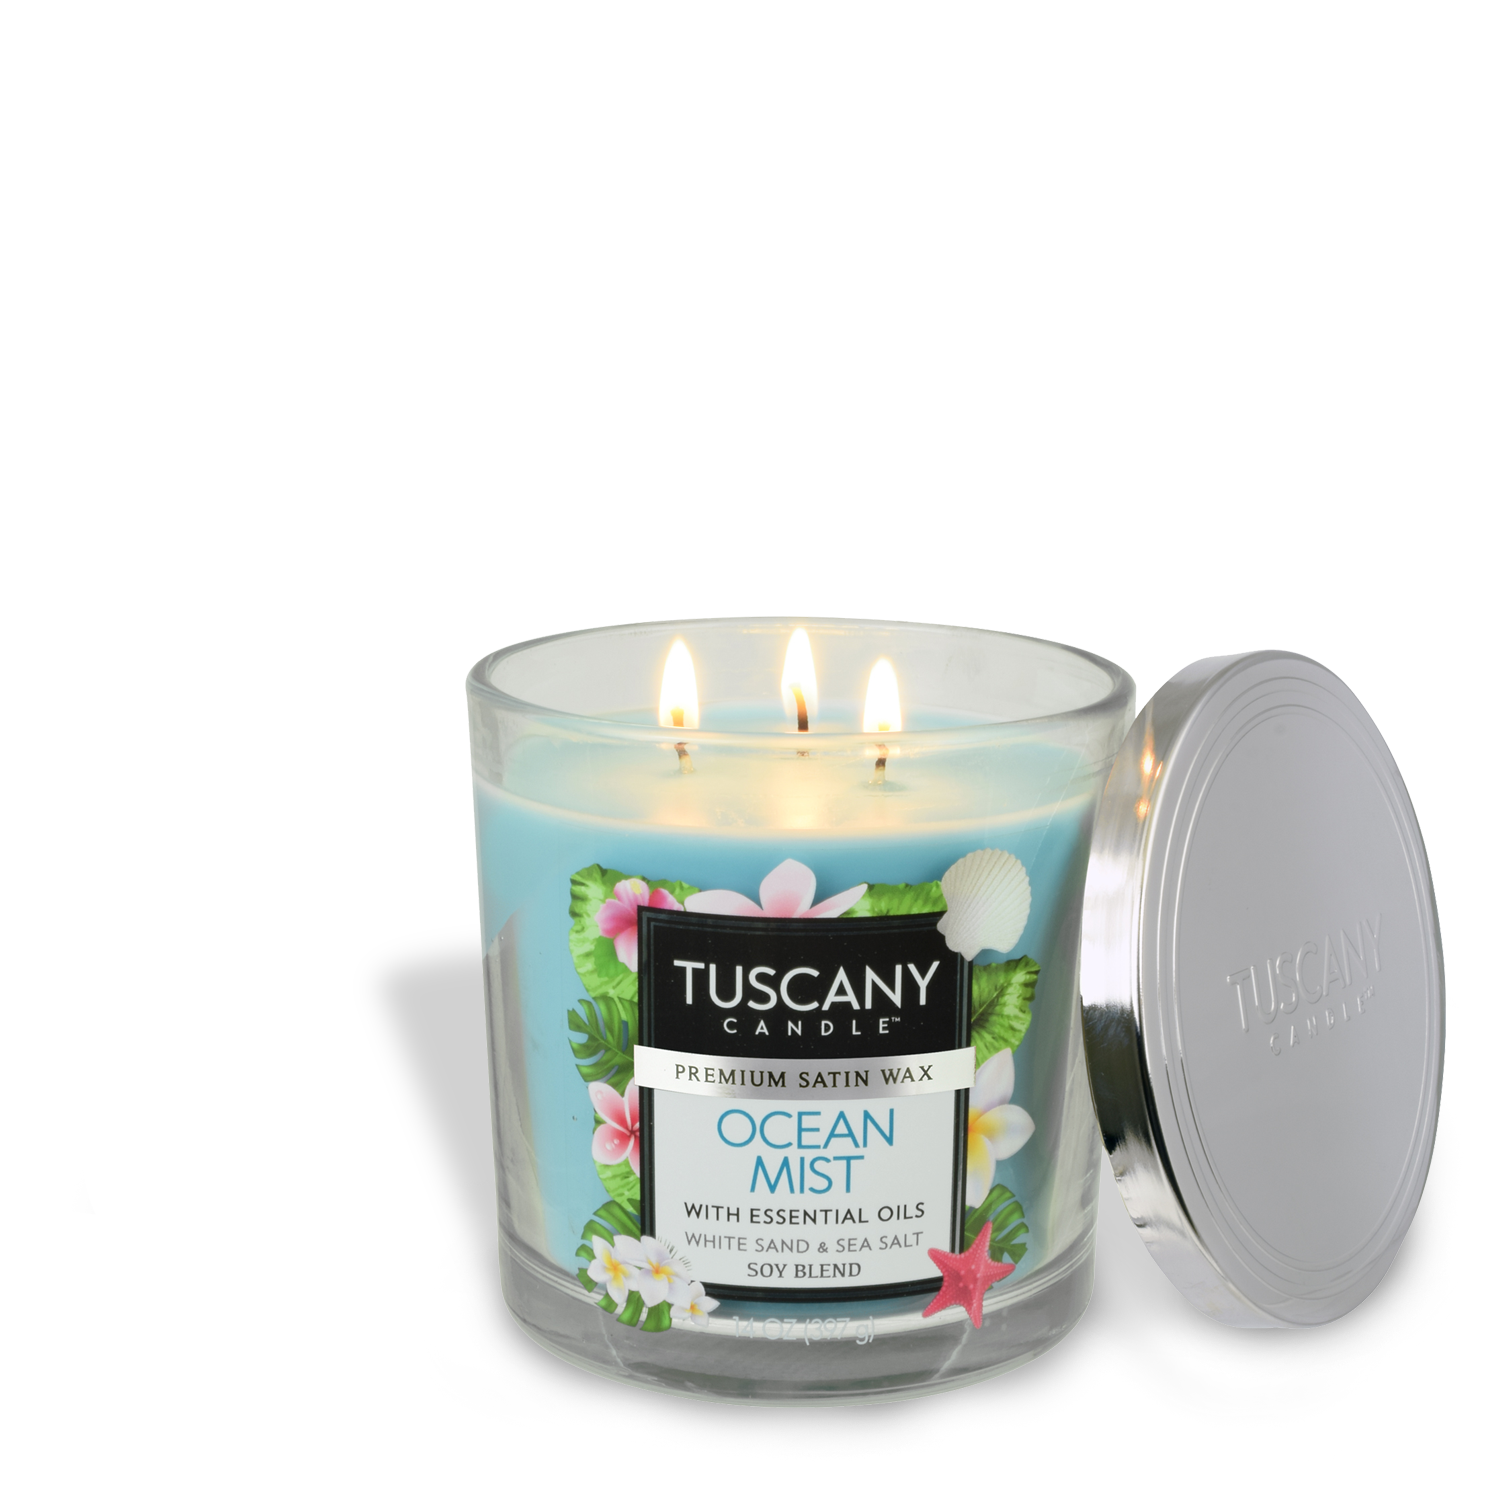 Tuscany Candle's Ocean Mist Long-Lasting Scented Jar Candle (14 oz) in a glass vessel with essential oils for a soothing fragrance.